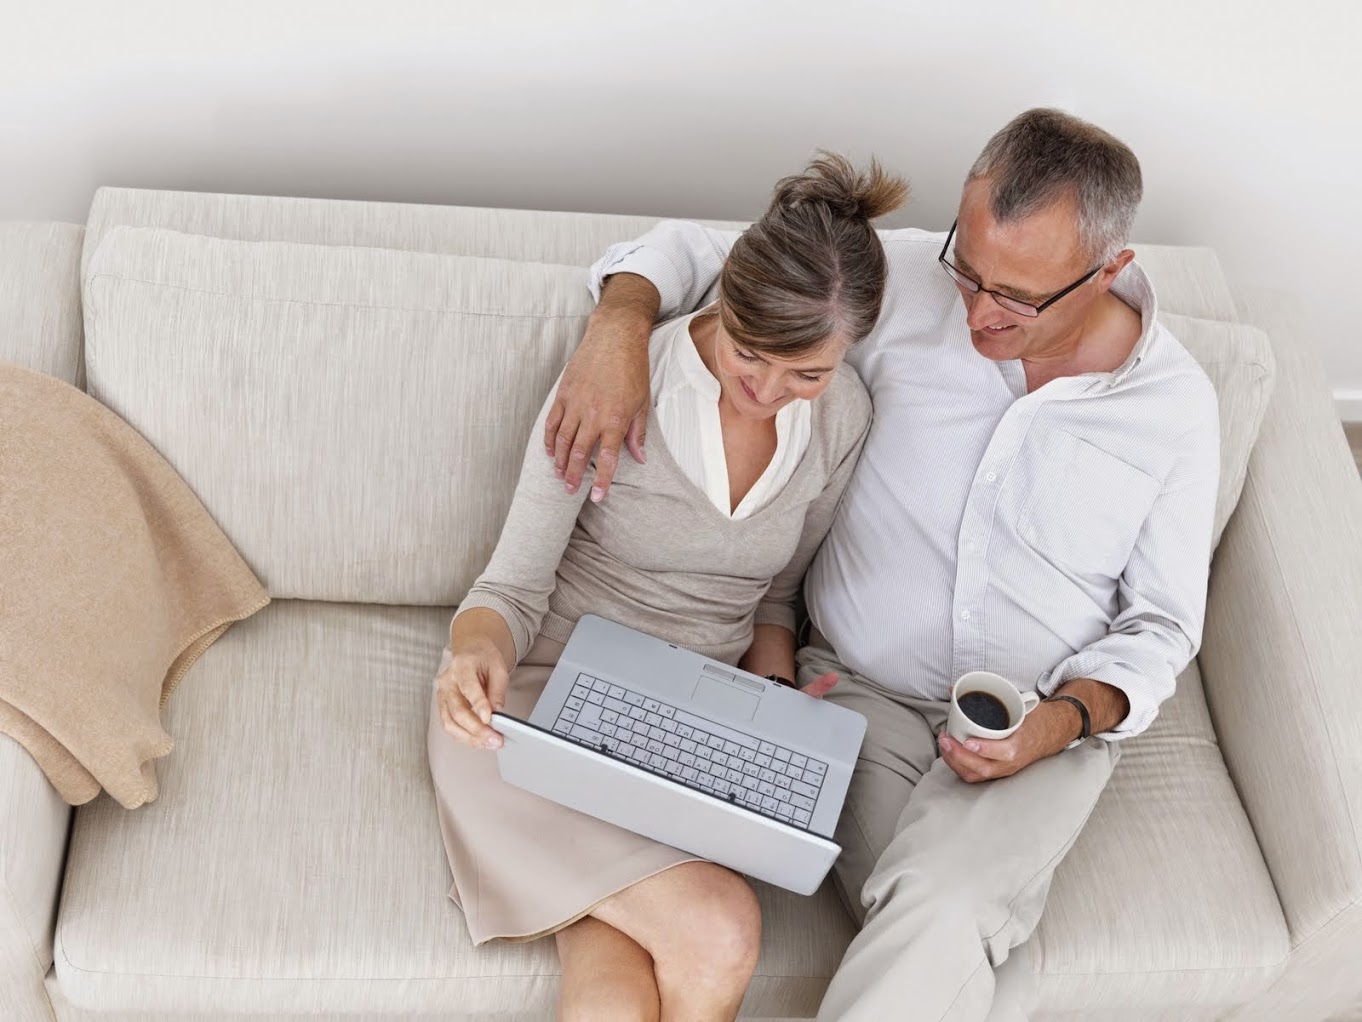 Man and woman sitting on love seat looking at laptop in woman's lap